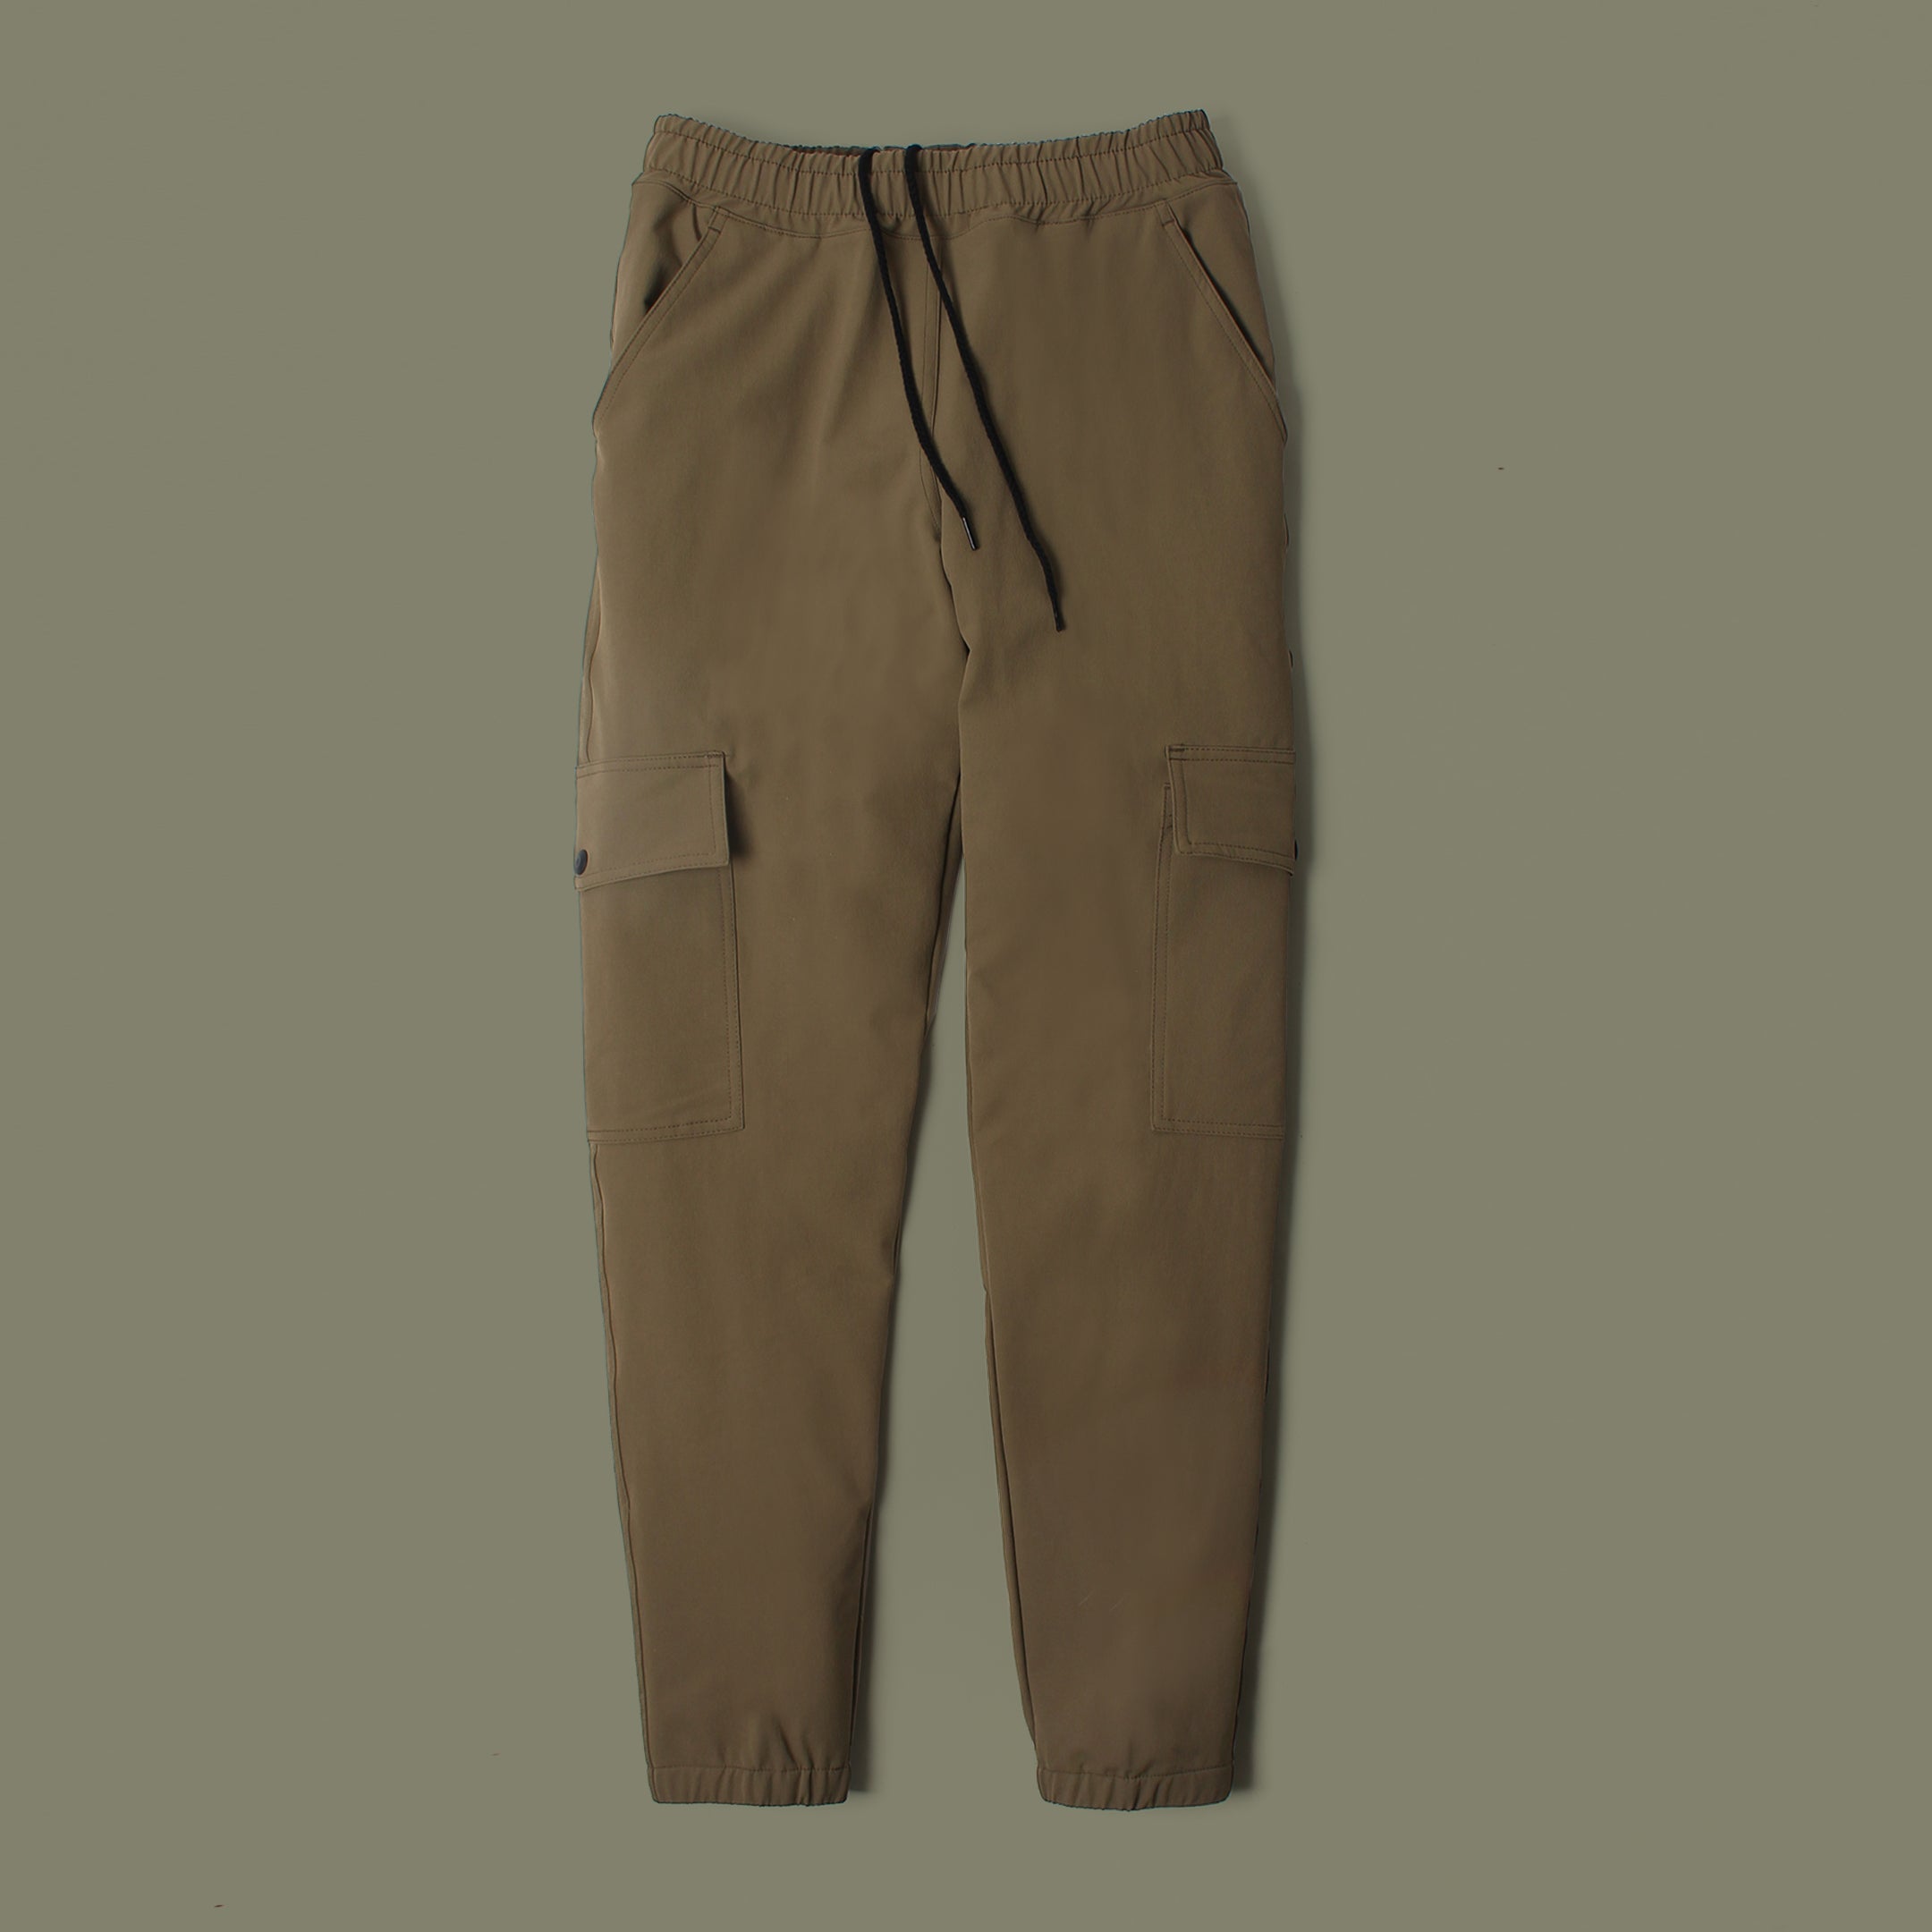 Camp Cargo Pant - Olive